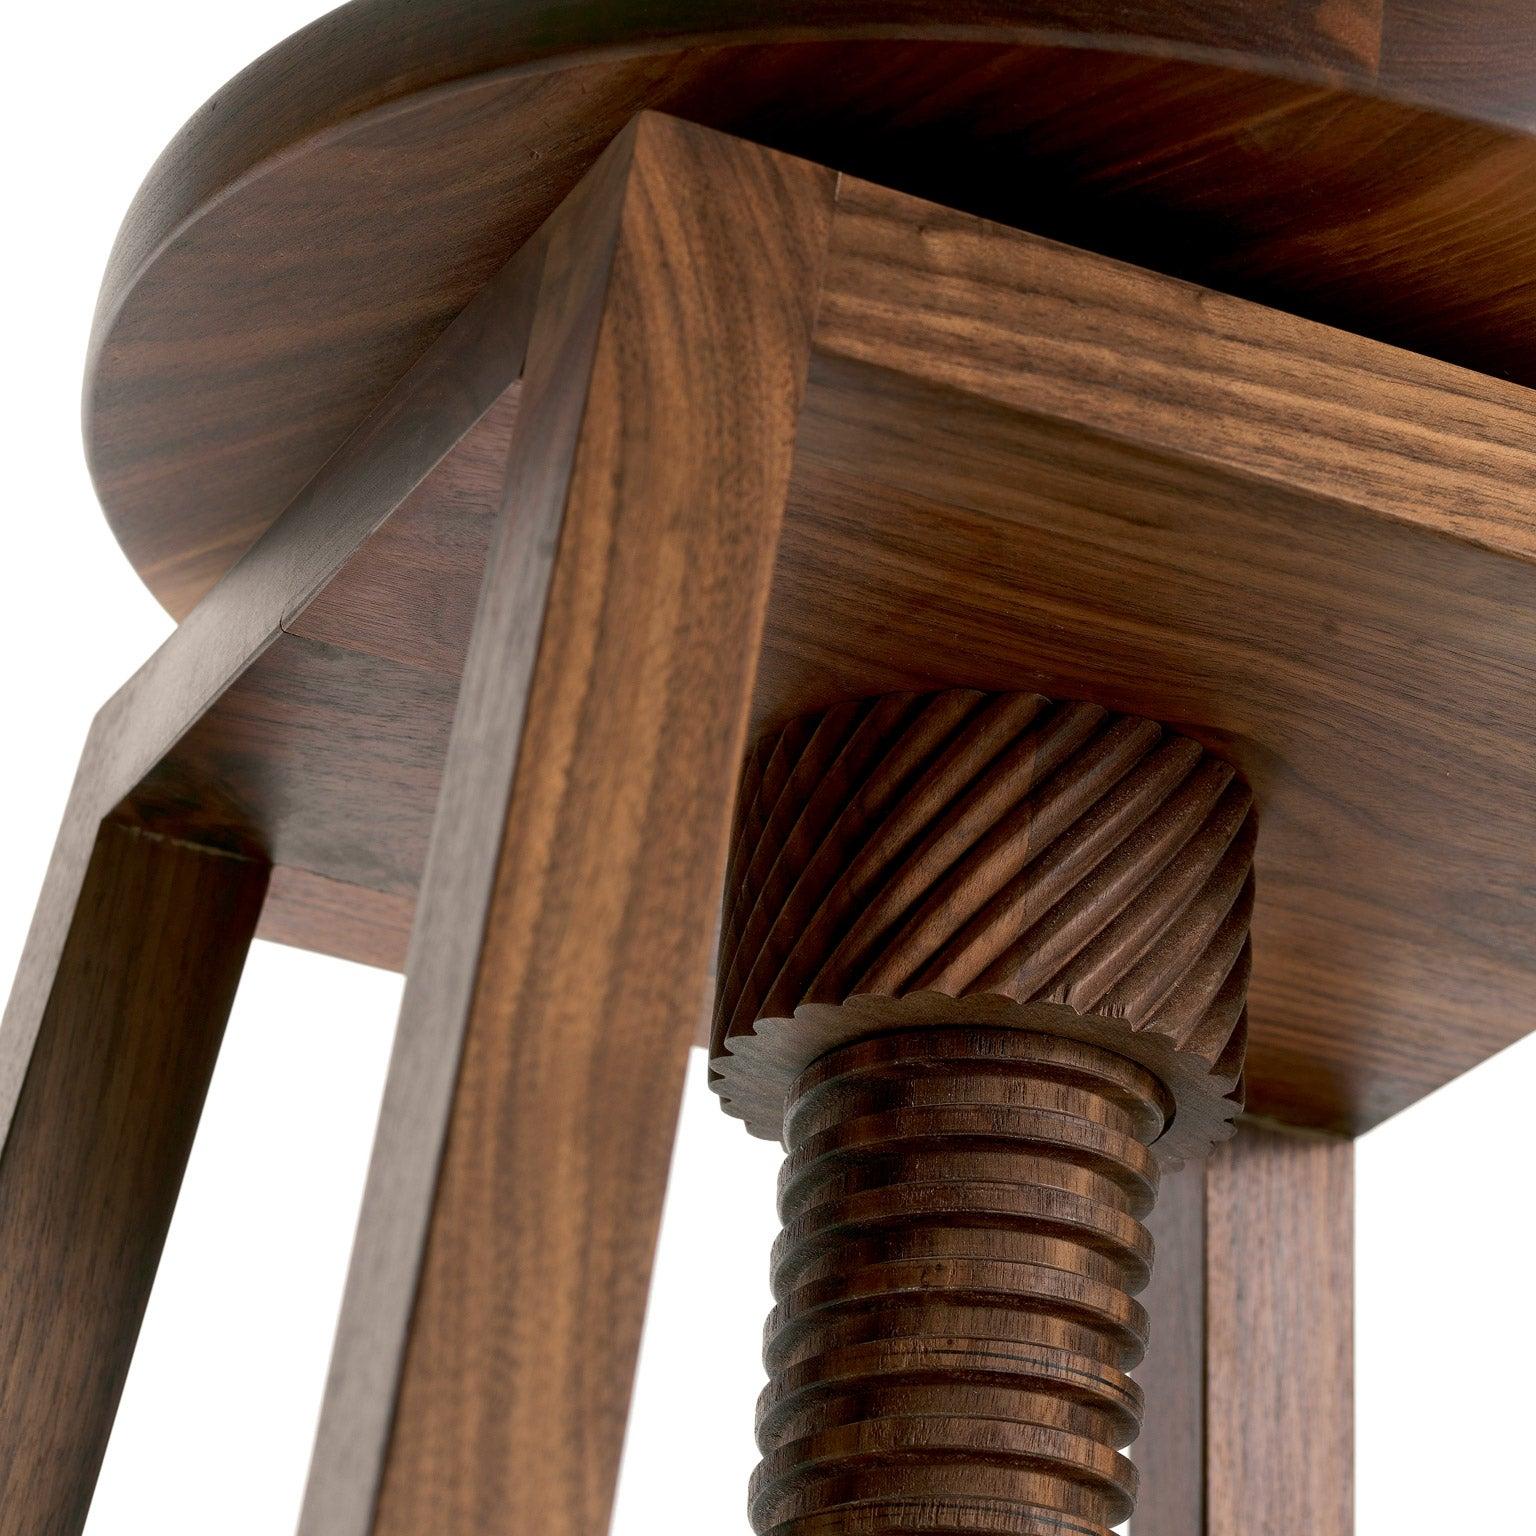 Modern Invito Solid Wood Stool, Walnut in Hand-Made Natural Finish, Contemporary For Sale